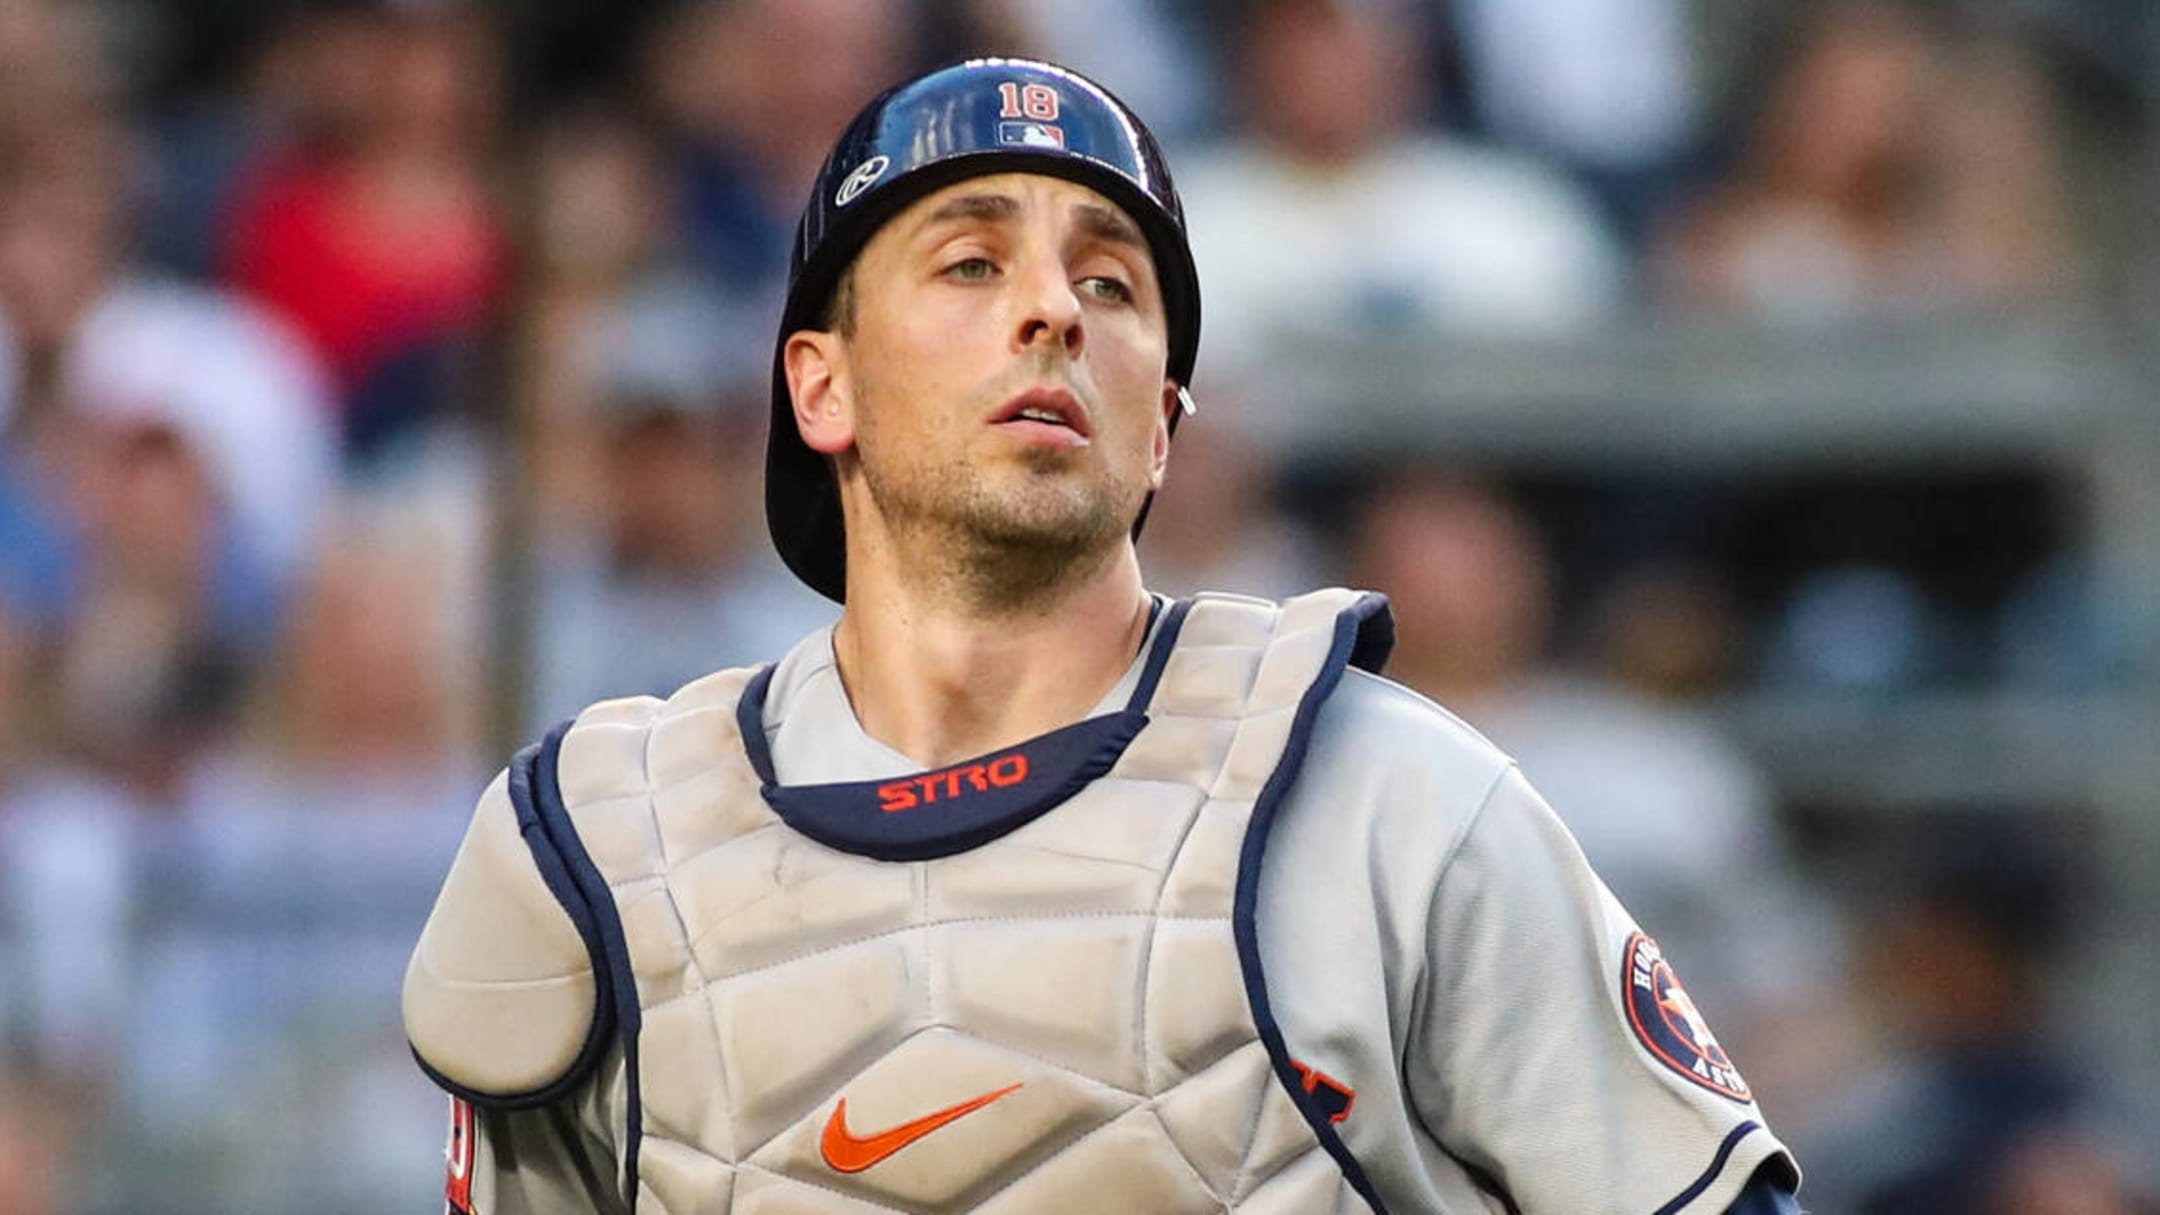 Astros catcher Jason Castro out for season due to knee surgery